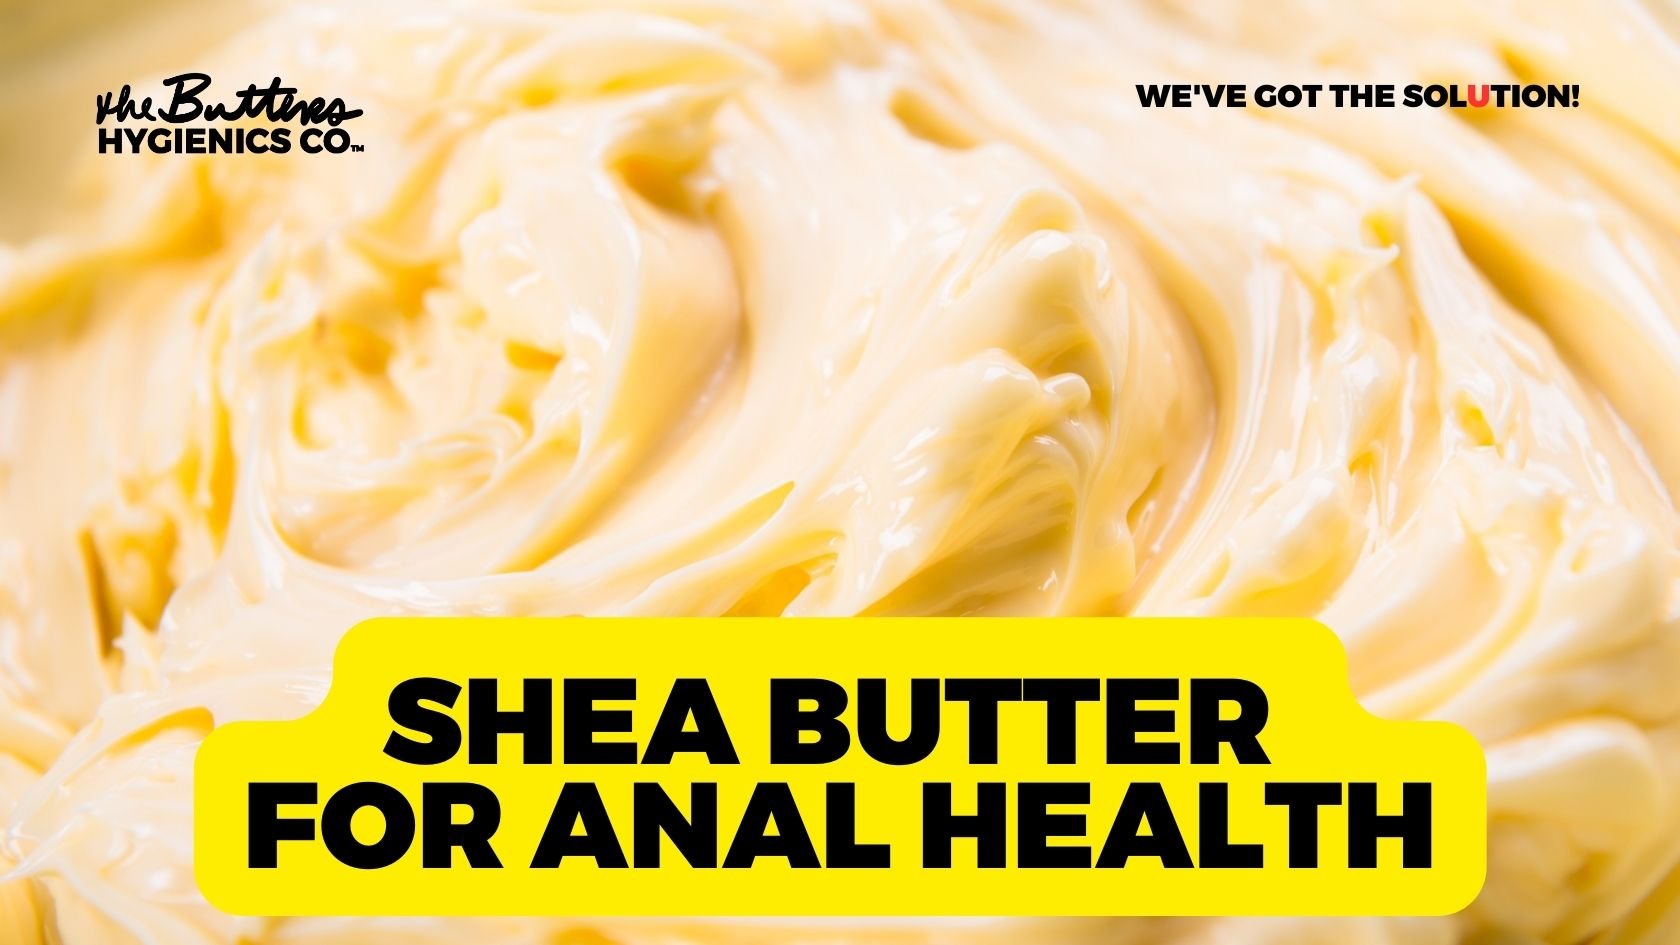 Shea Butter Booty Benefits of Shea Butter for Anal Sex, Hygiene — The Butters Hygienics picture